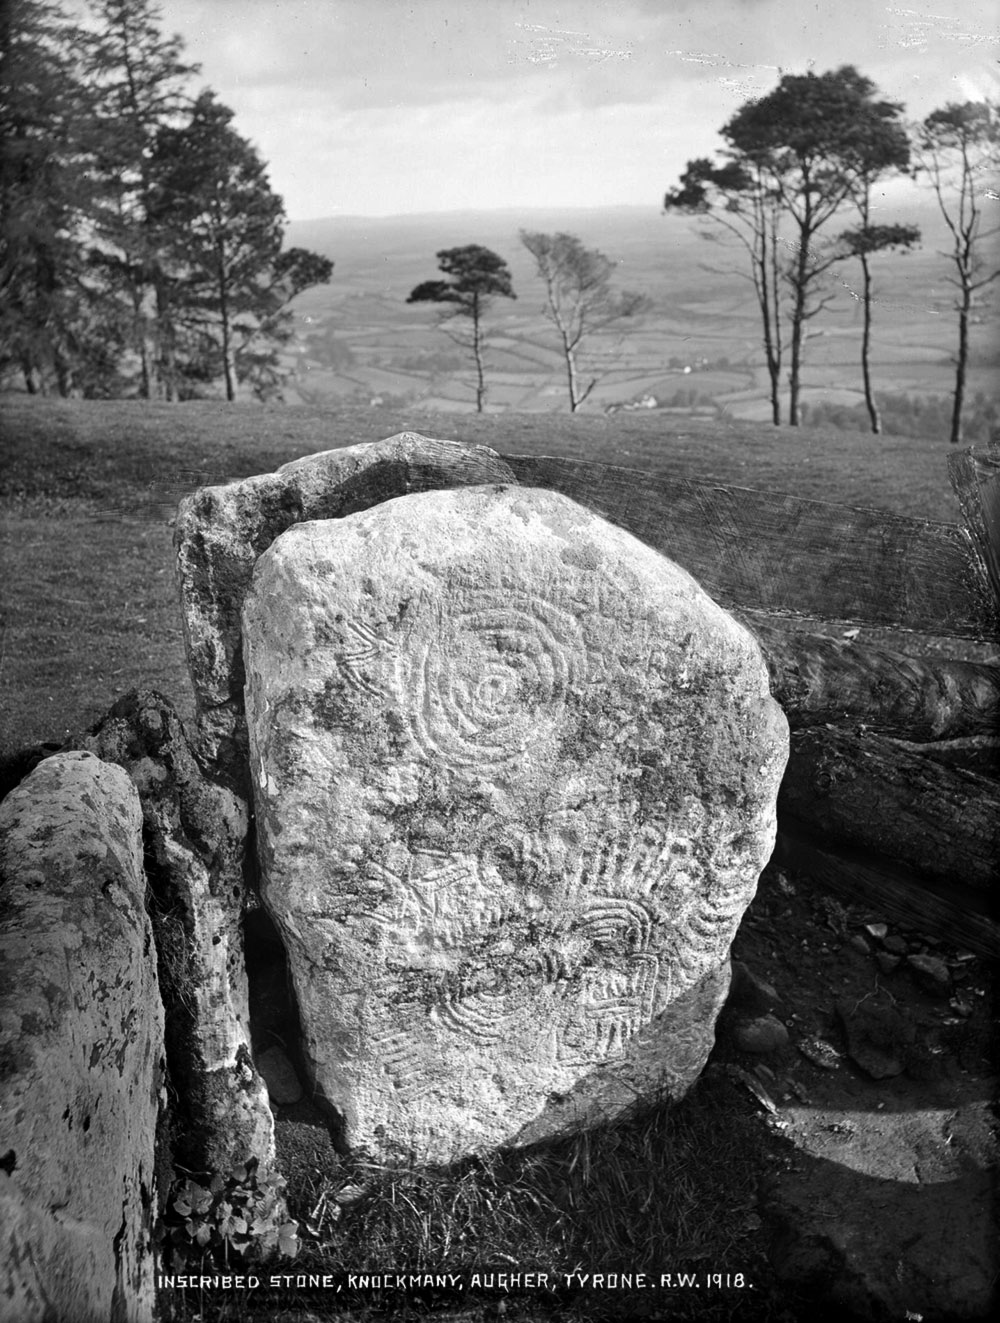 Decorated stone at the Knockmany passage-grave. Photograph by Robert Welch, © NMNI.